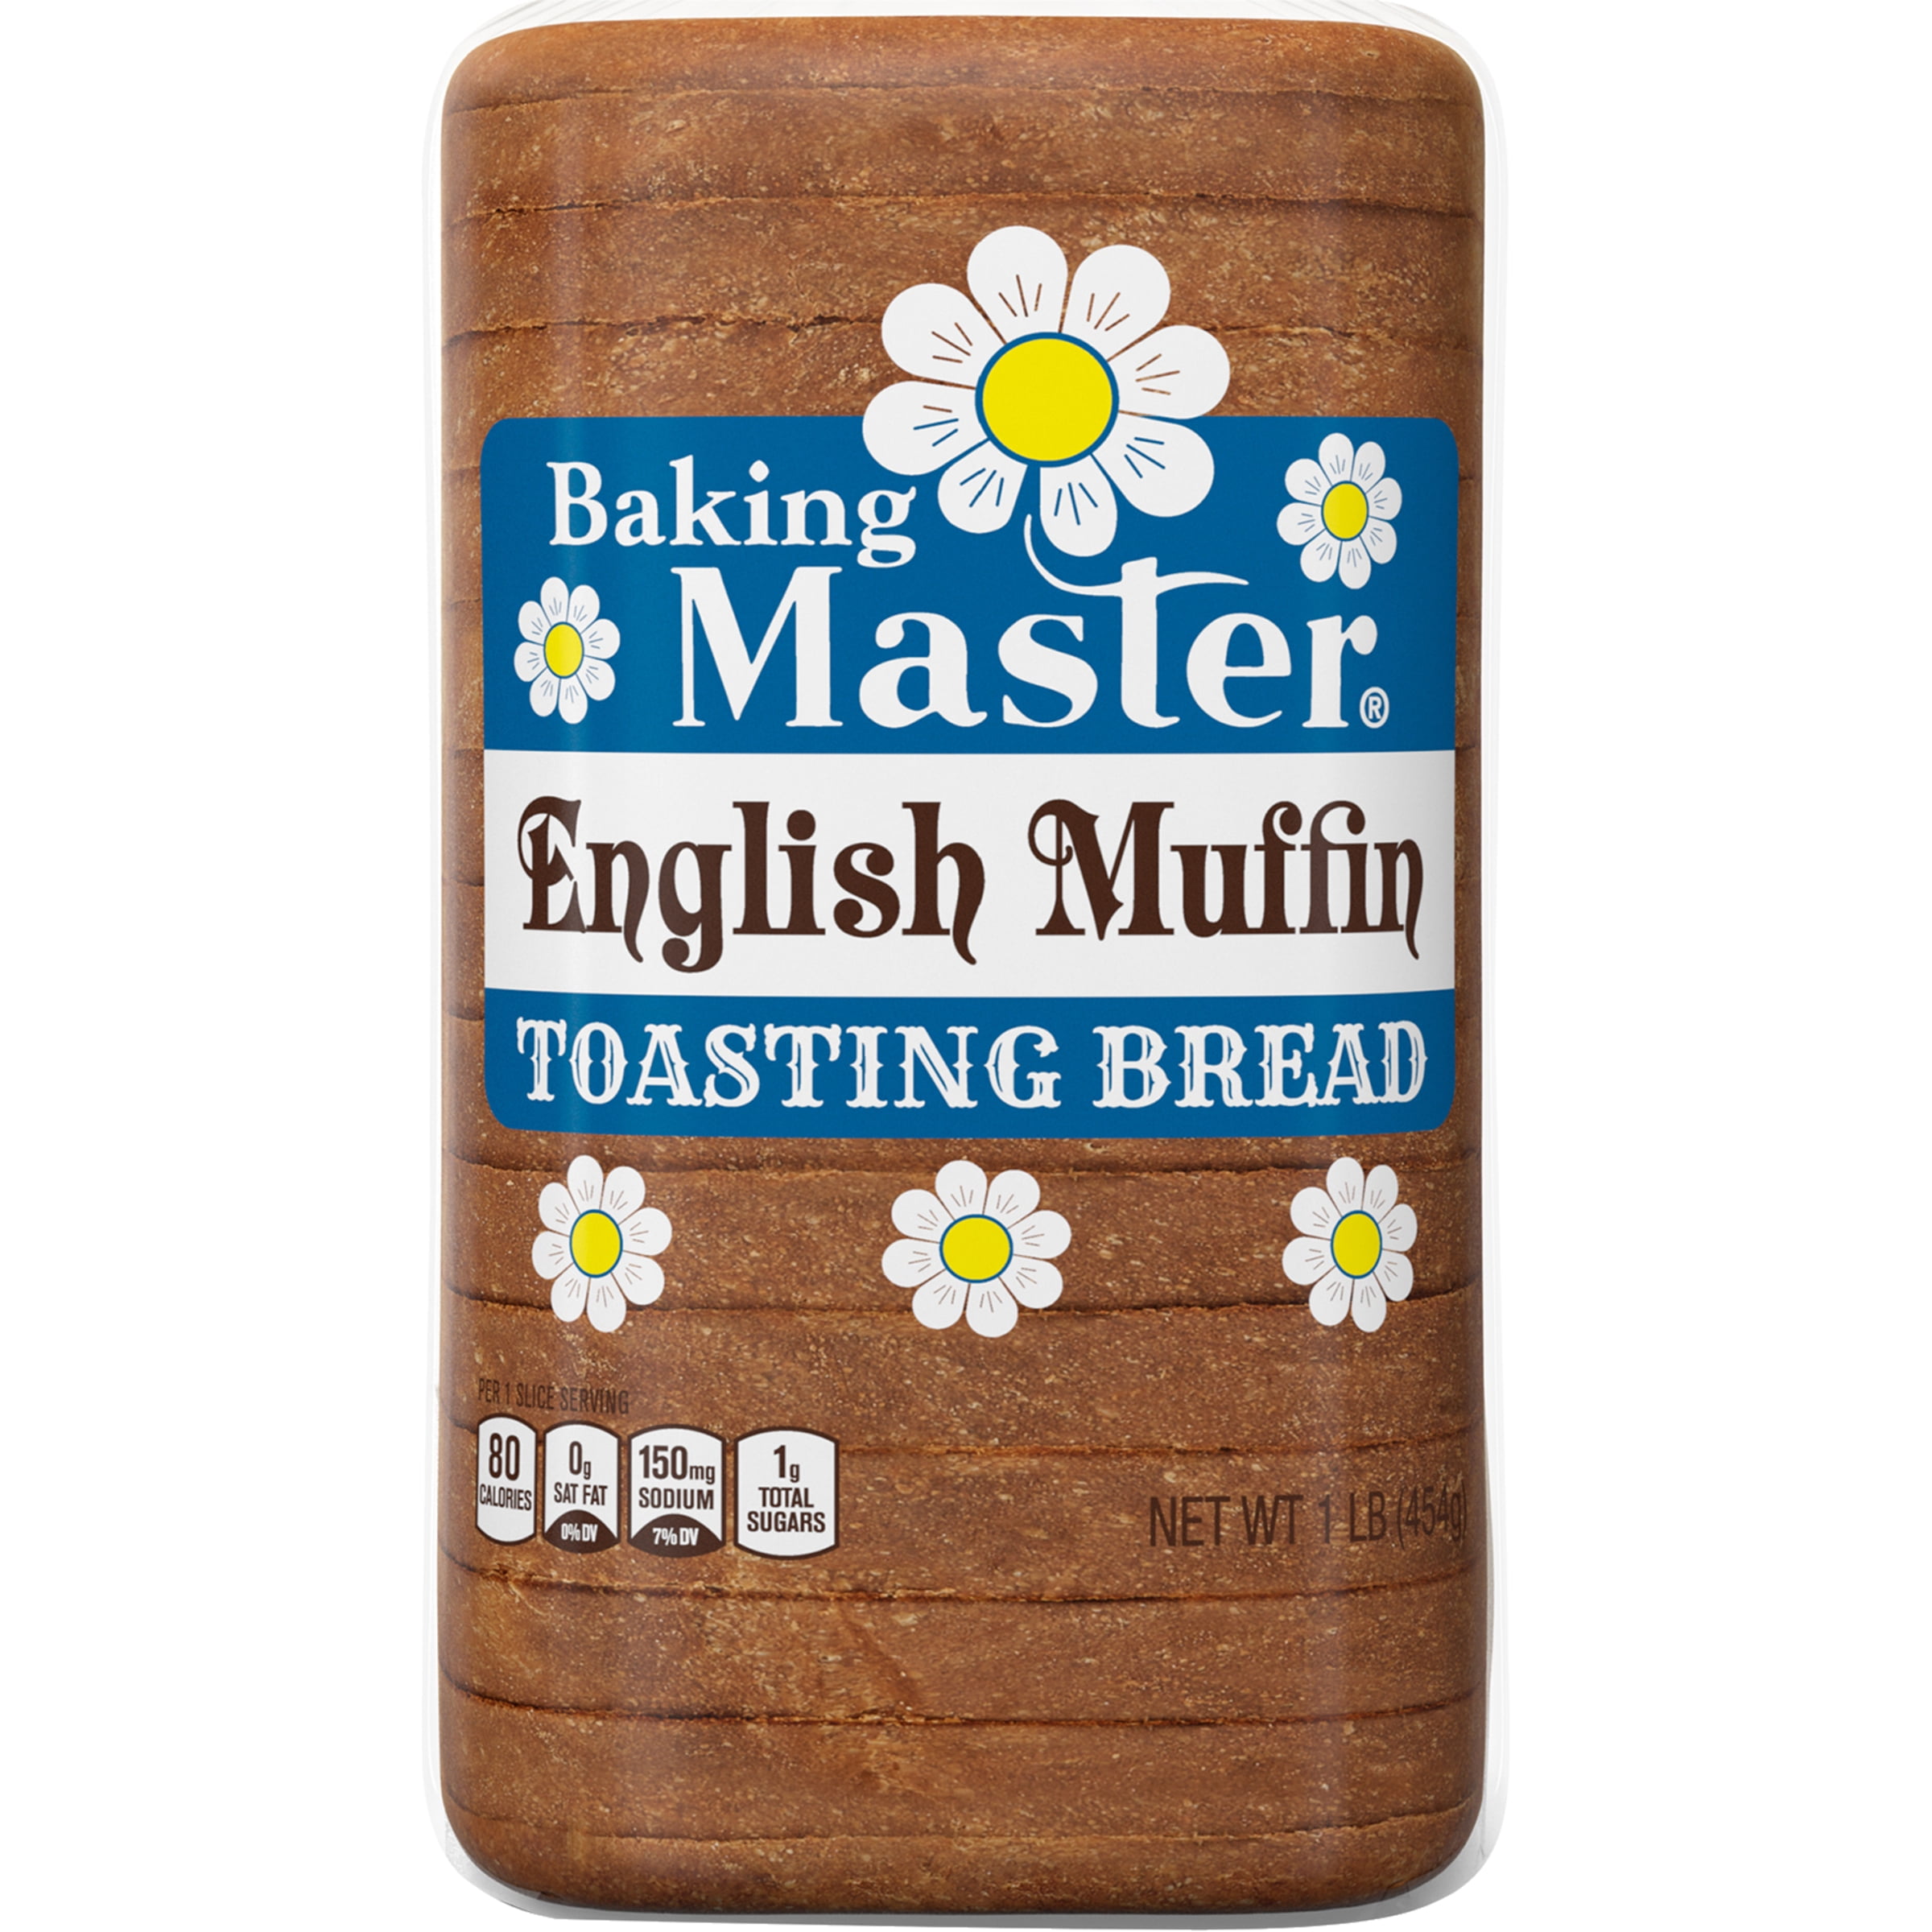 English muffin maker among brands picked for BeyondSKU accelerator